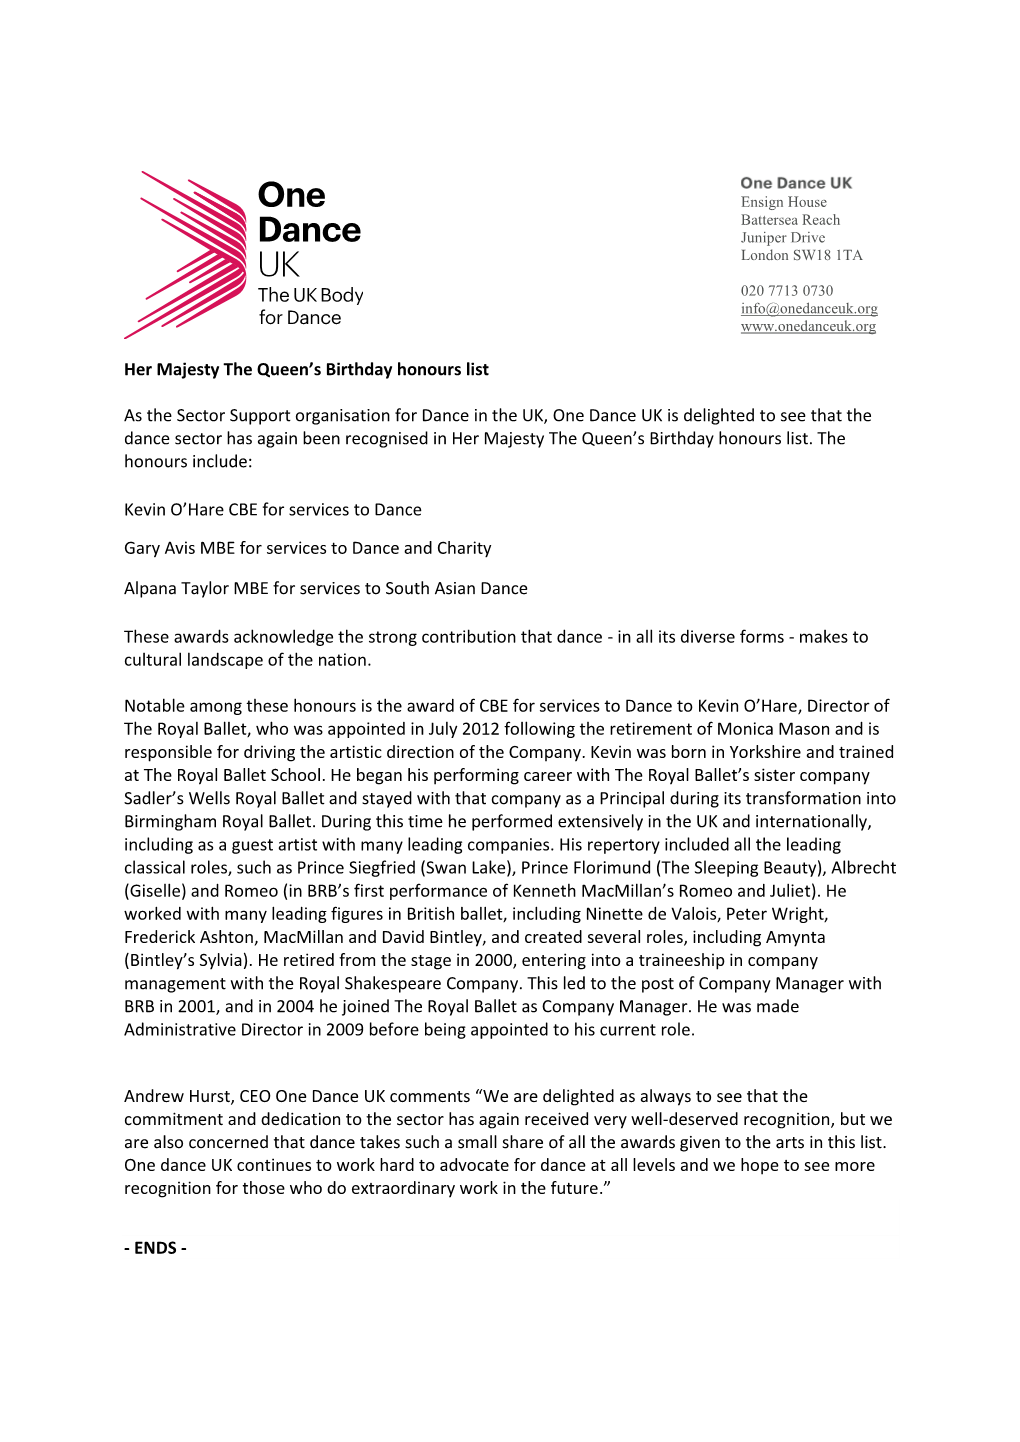 Her Majesty the Queen's Birthday Honours List As the Sector Support Organisation for Dance in the UK, One Dance UK Is Delighte